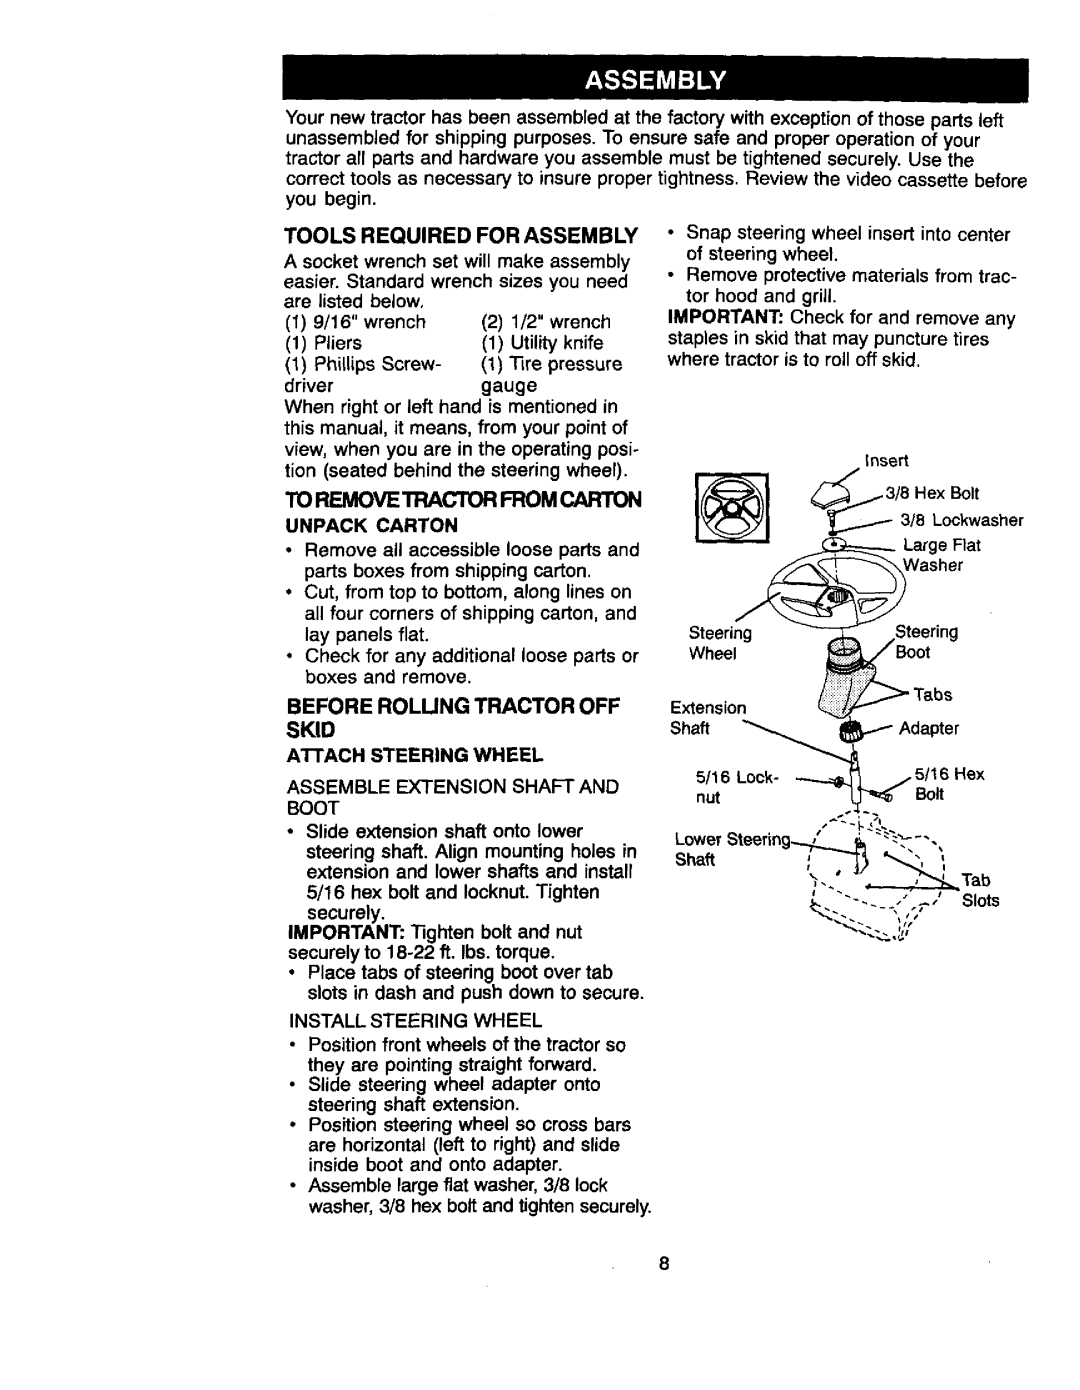 Craftsman 917.27066 owner manual To Remove Tractor from Carton, Before Rolung Tractor OFF Skid Attach Steering Wheel 